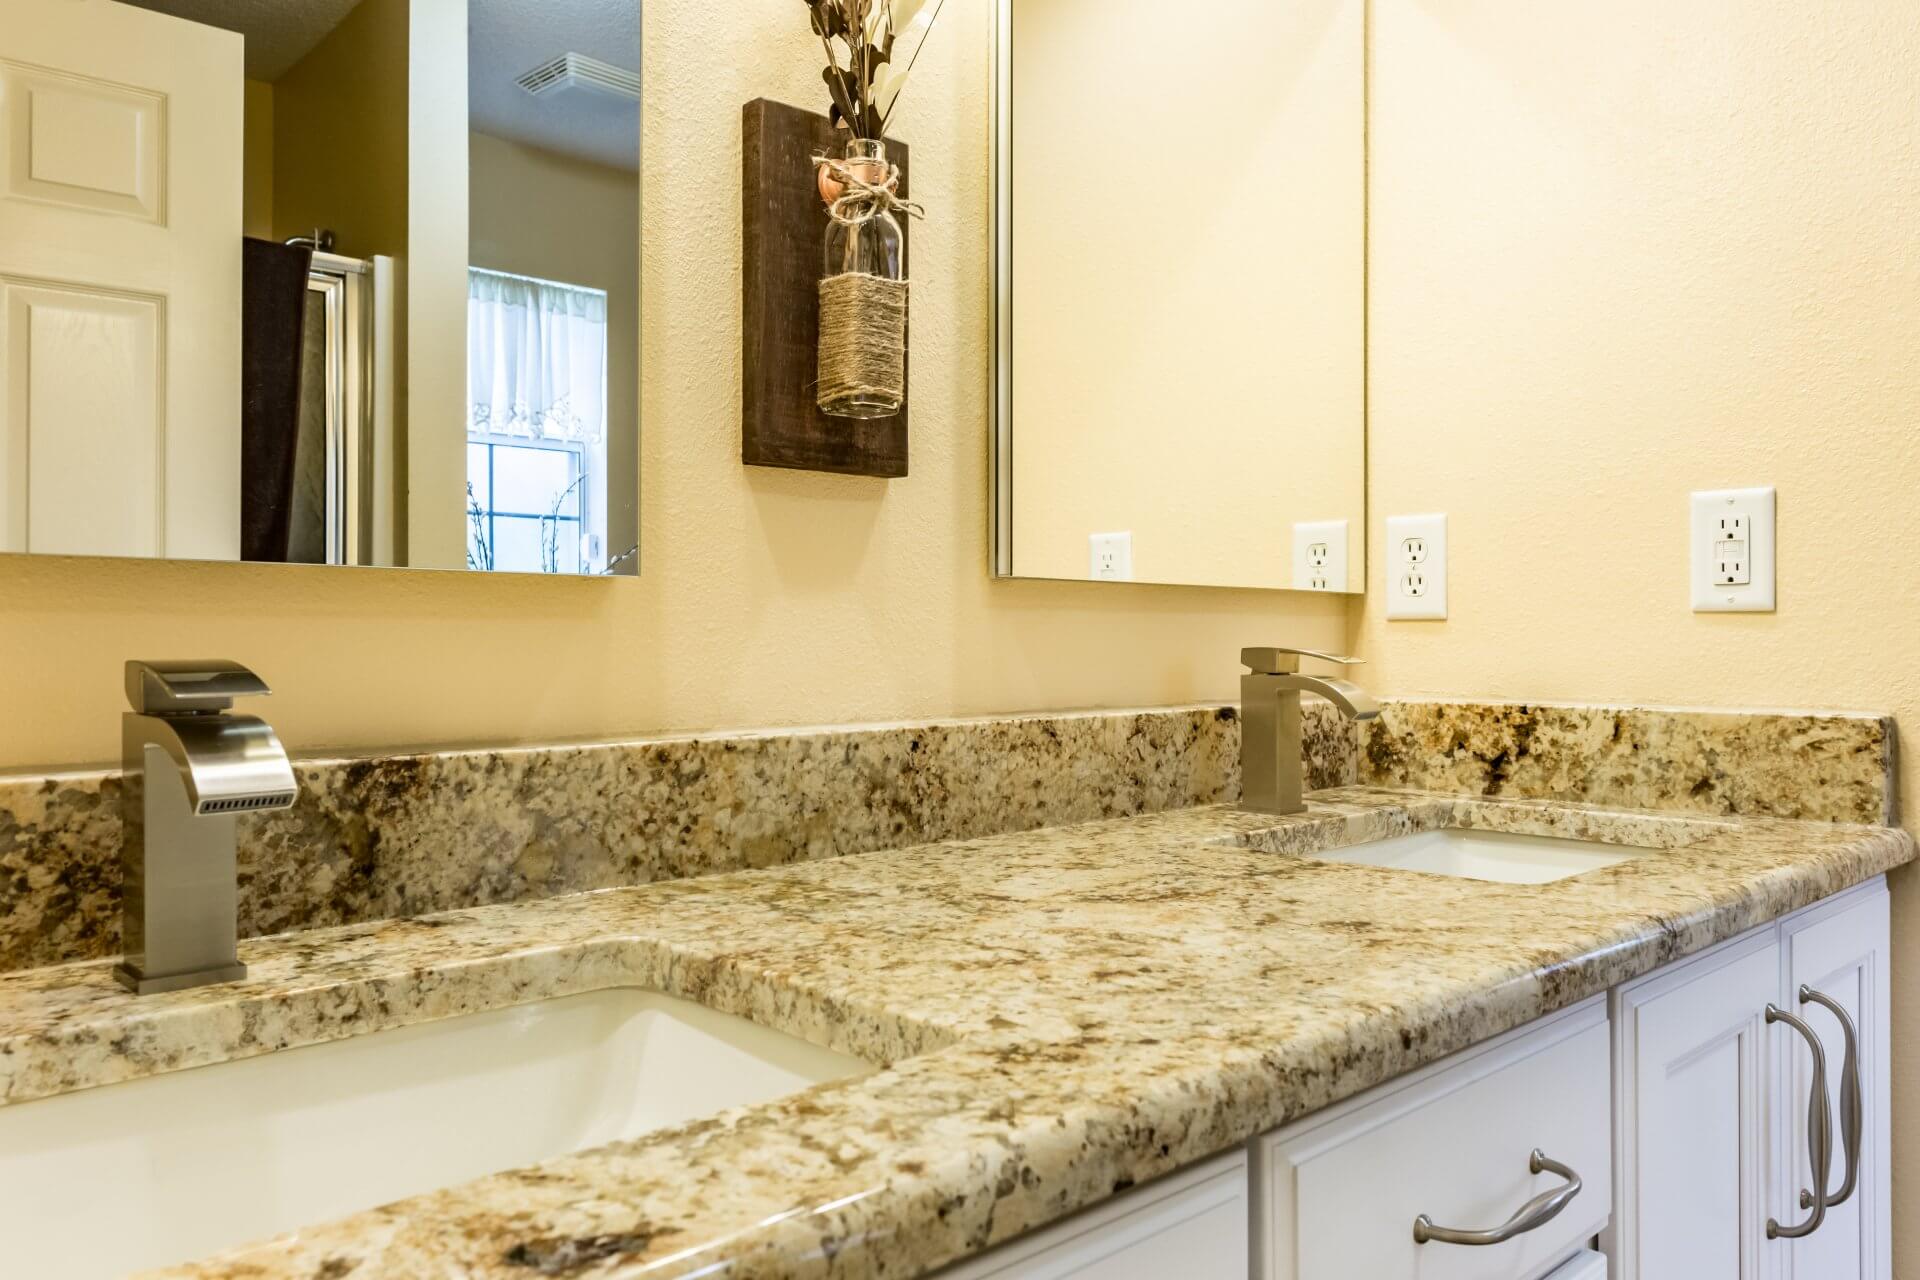 After - Updated bathroom counters and sinks